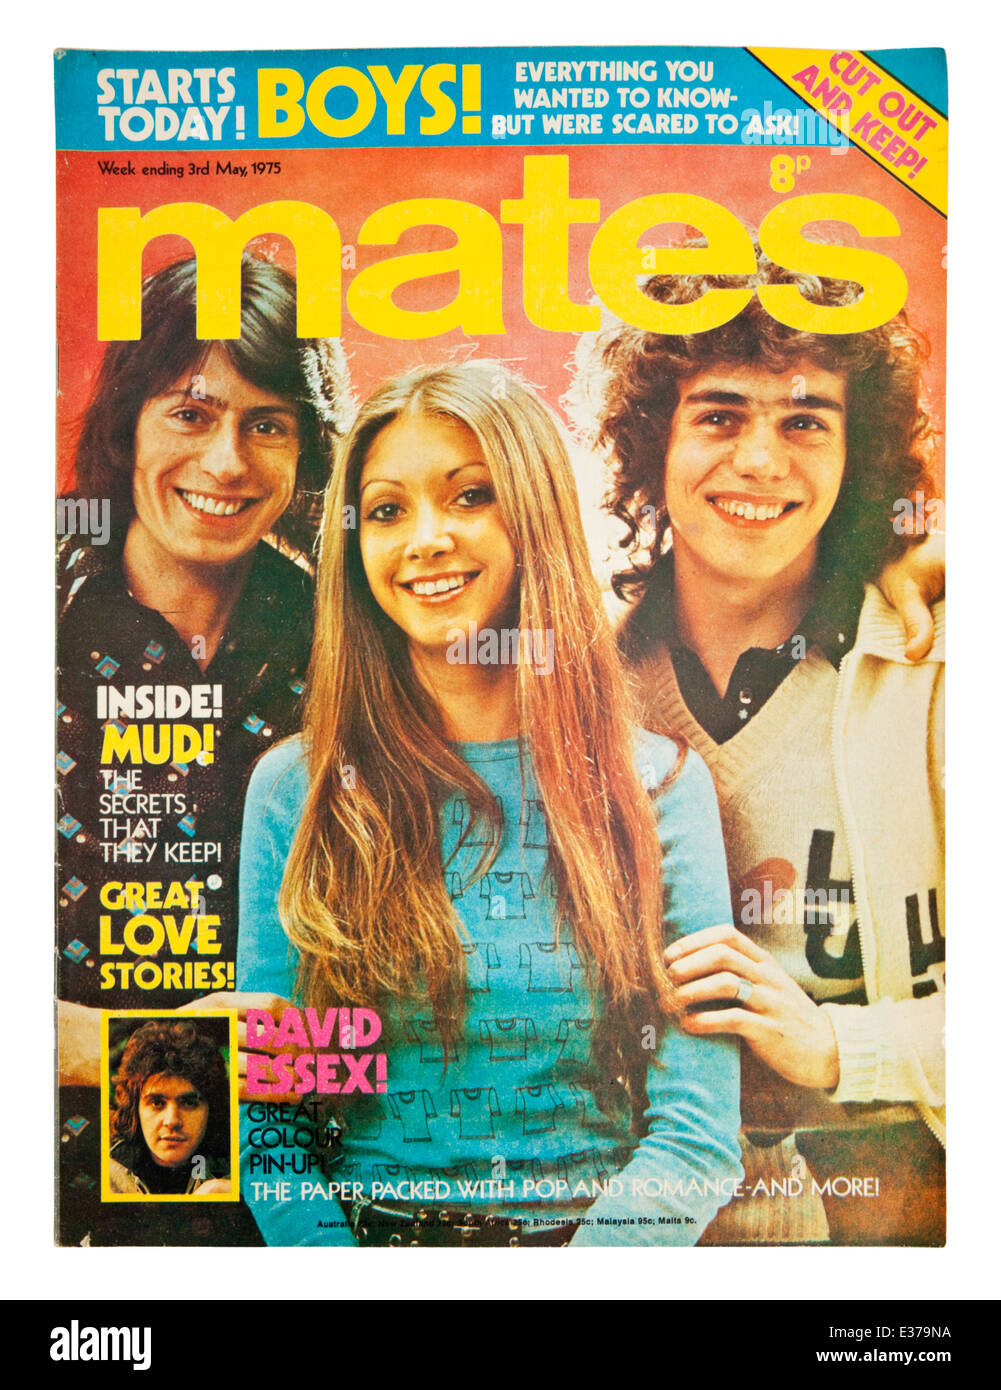 Vintage copy of 'Mates', a popular British weekly teen magazine from the mid 1970's. This is the 3rd May 1975 edition. Stock Photo